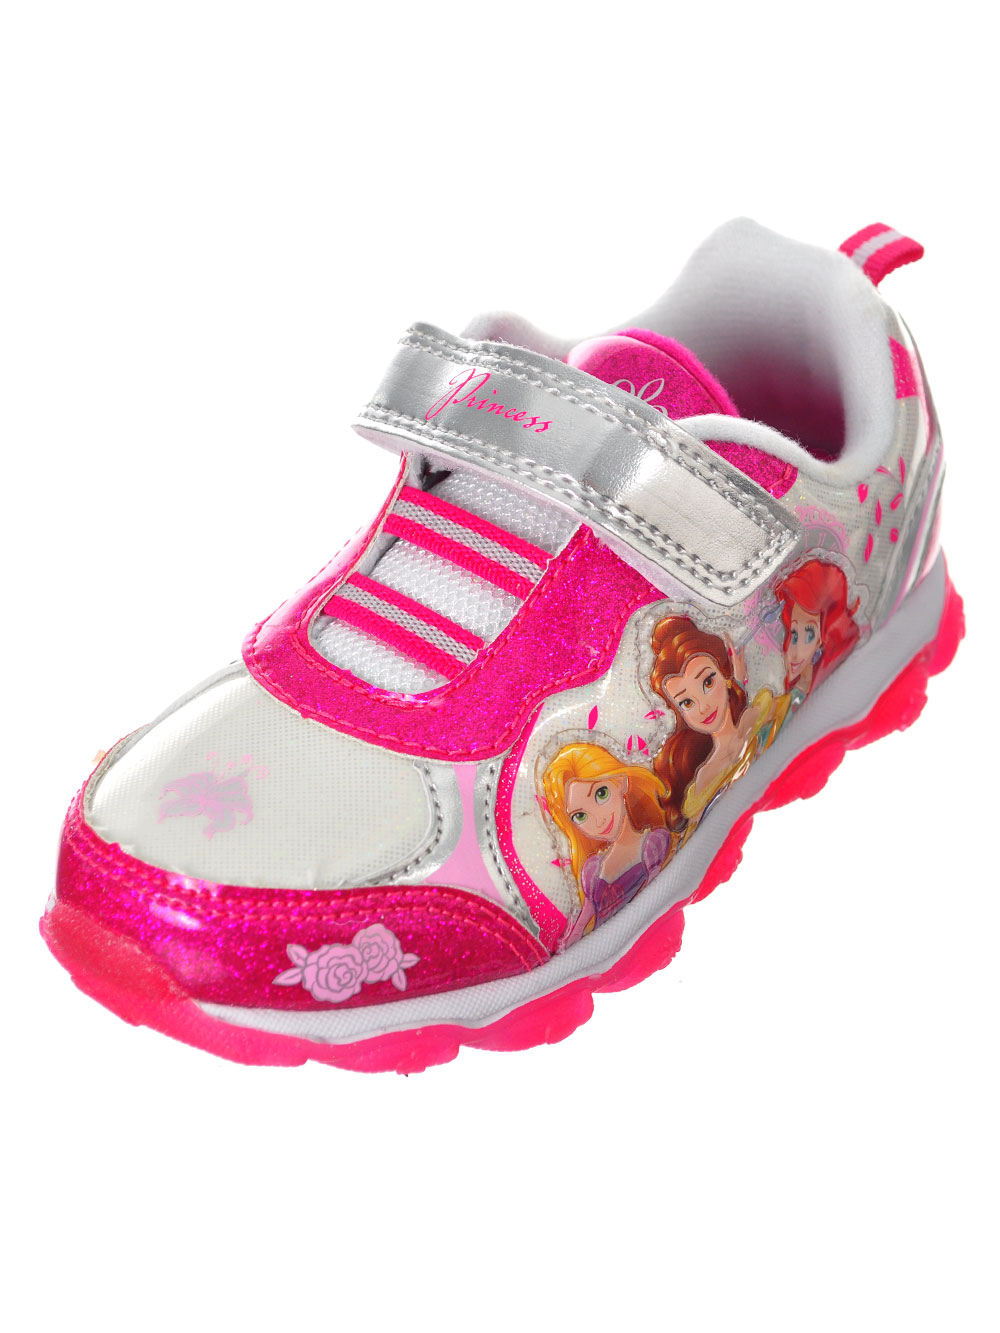 girls light up shoes size 12